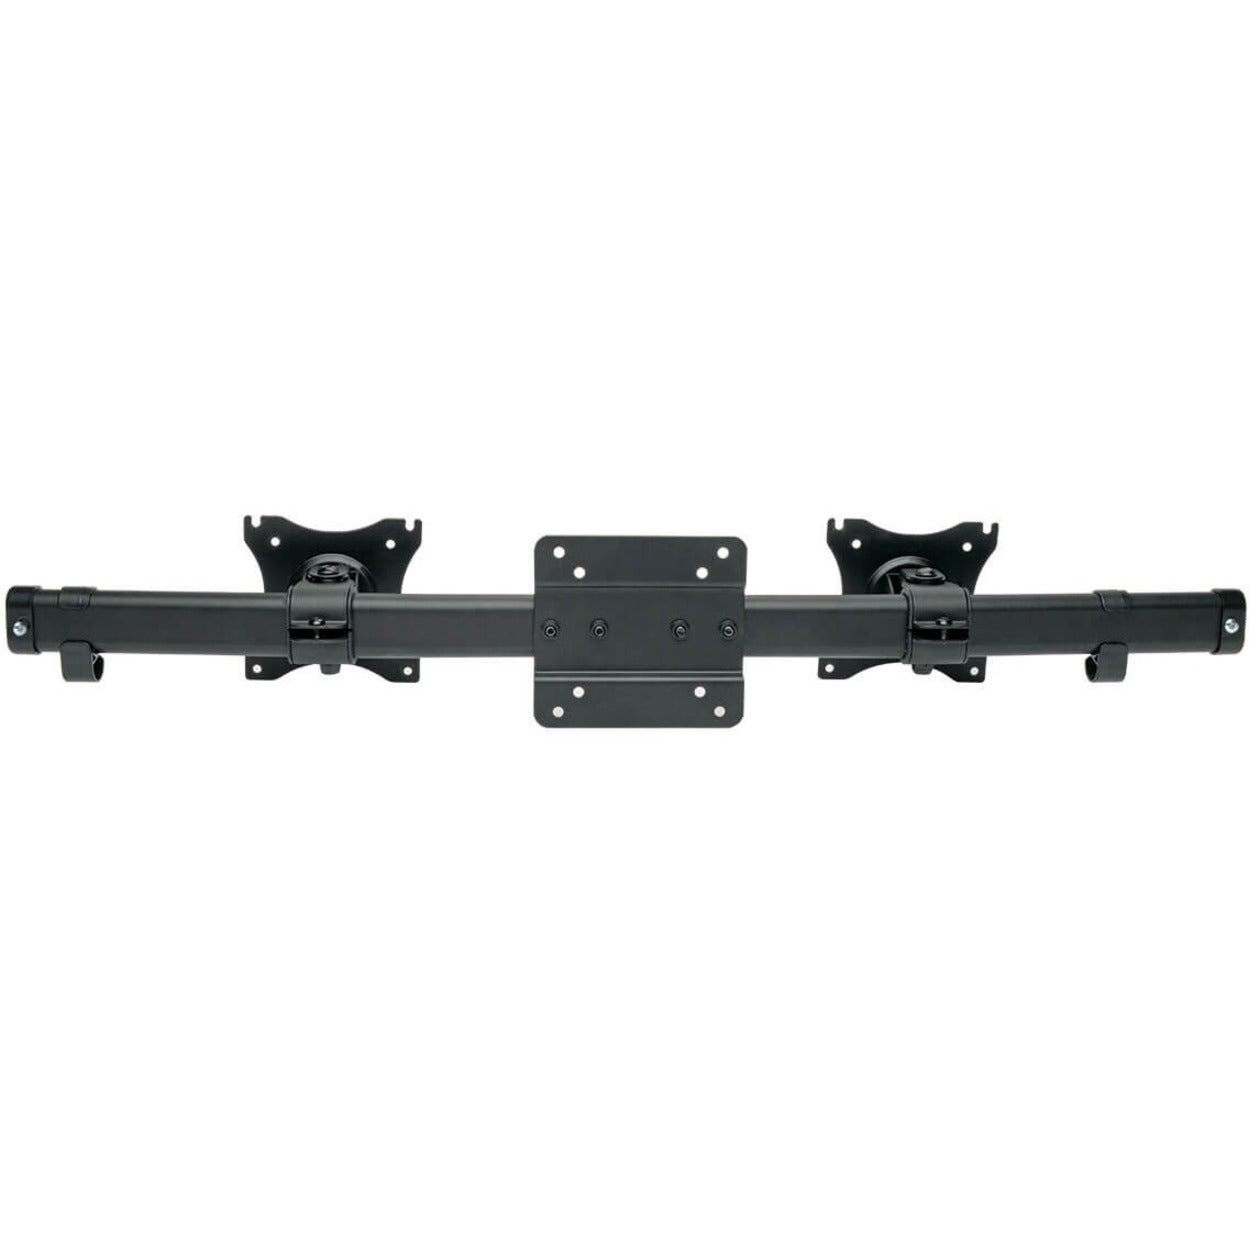 Tripp Lite DMA1327SD Universal Dual-Monitor Mount Adapter, Mounting Kit for Flat Panel Display and TV, 22 lb Maximum Load Capacity, 27" Maximum Screen Size Supported